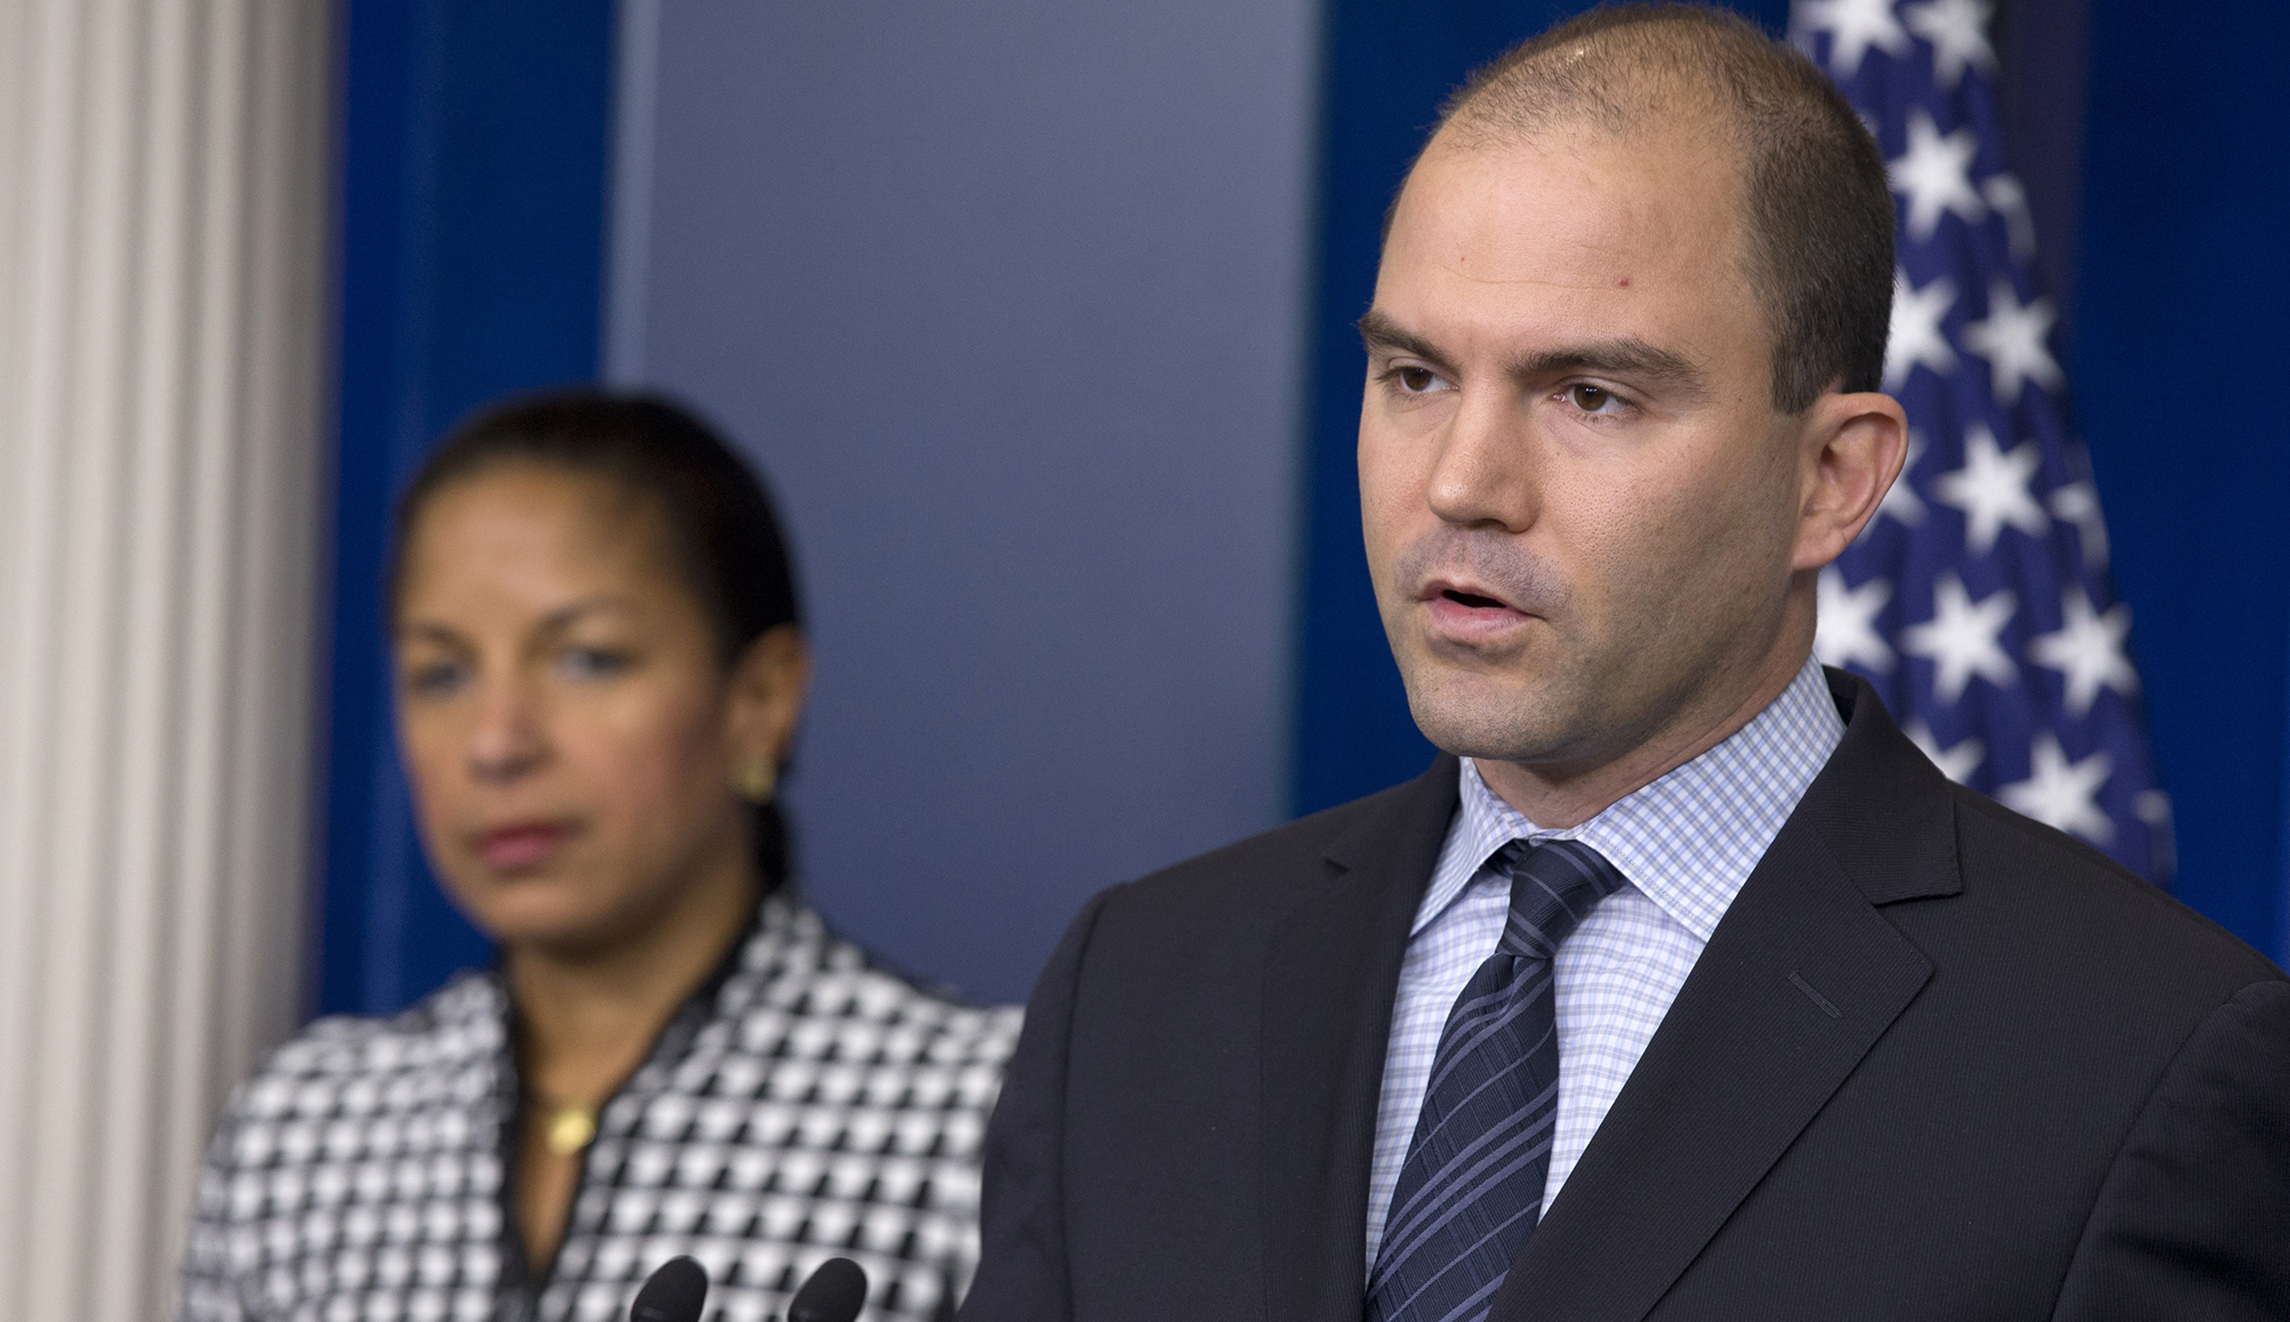 Judge rules Susan Rice, Ben Rhodes must answer watchdog’s questions on Clinton email server, Benghazi